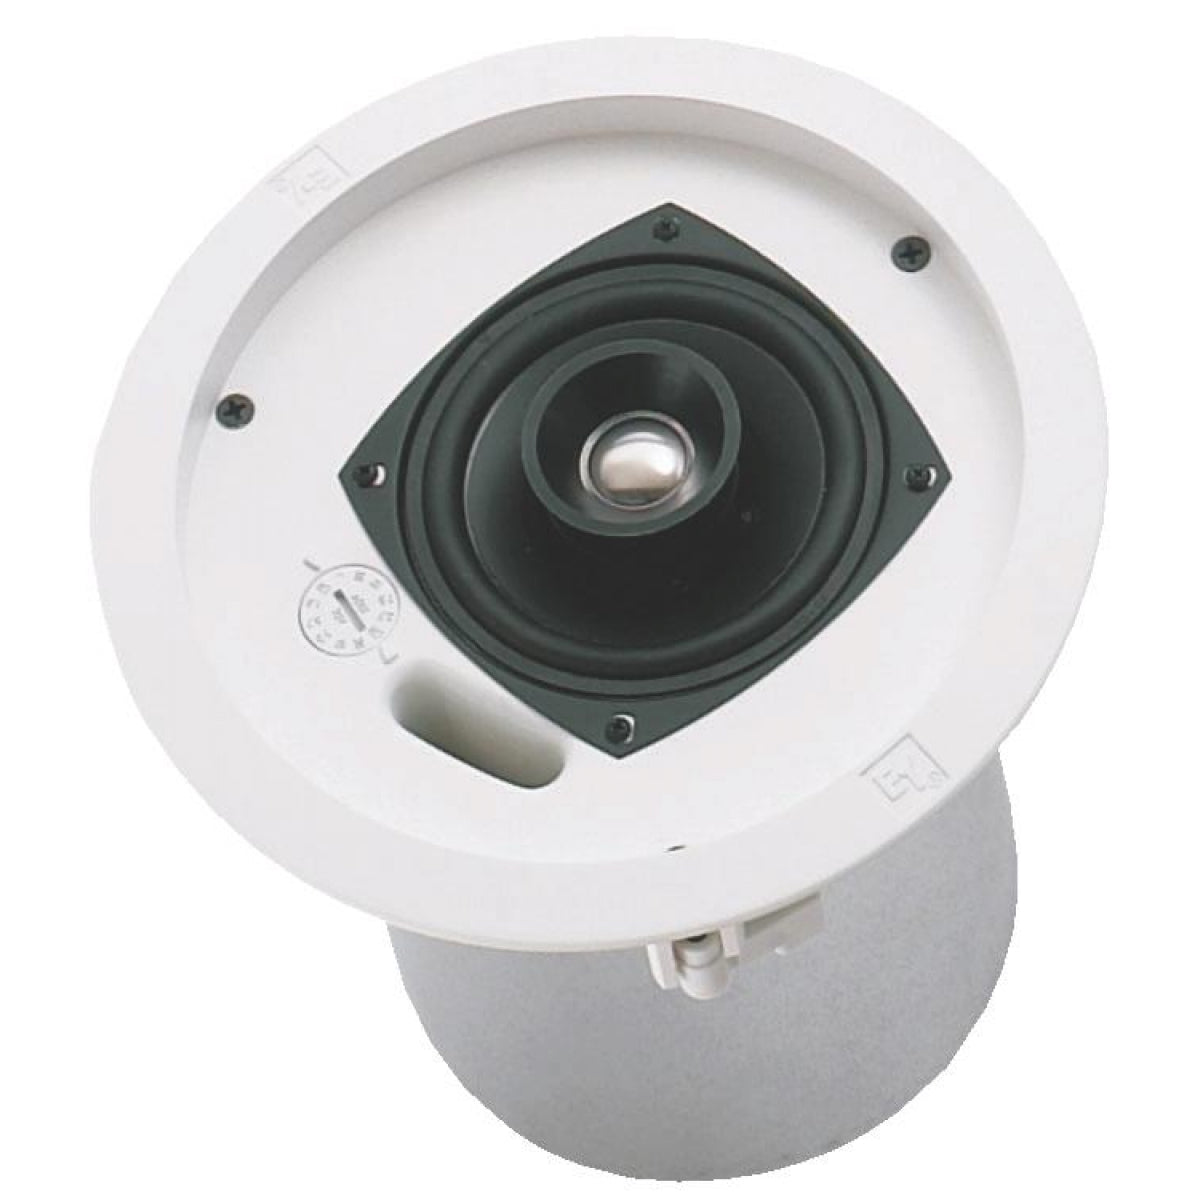 Electro-Voice EVID C4.2 Evid Series 4 Inch Two Way Ceiling System (Pair)